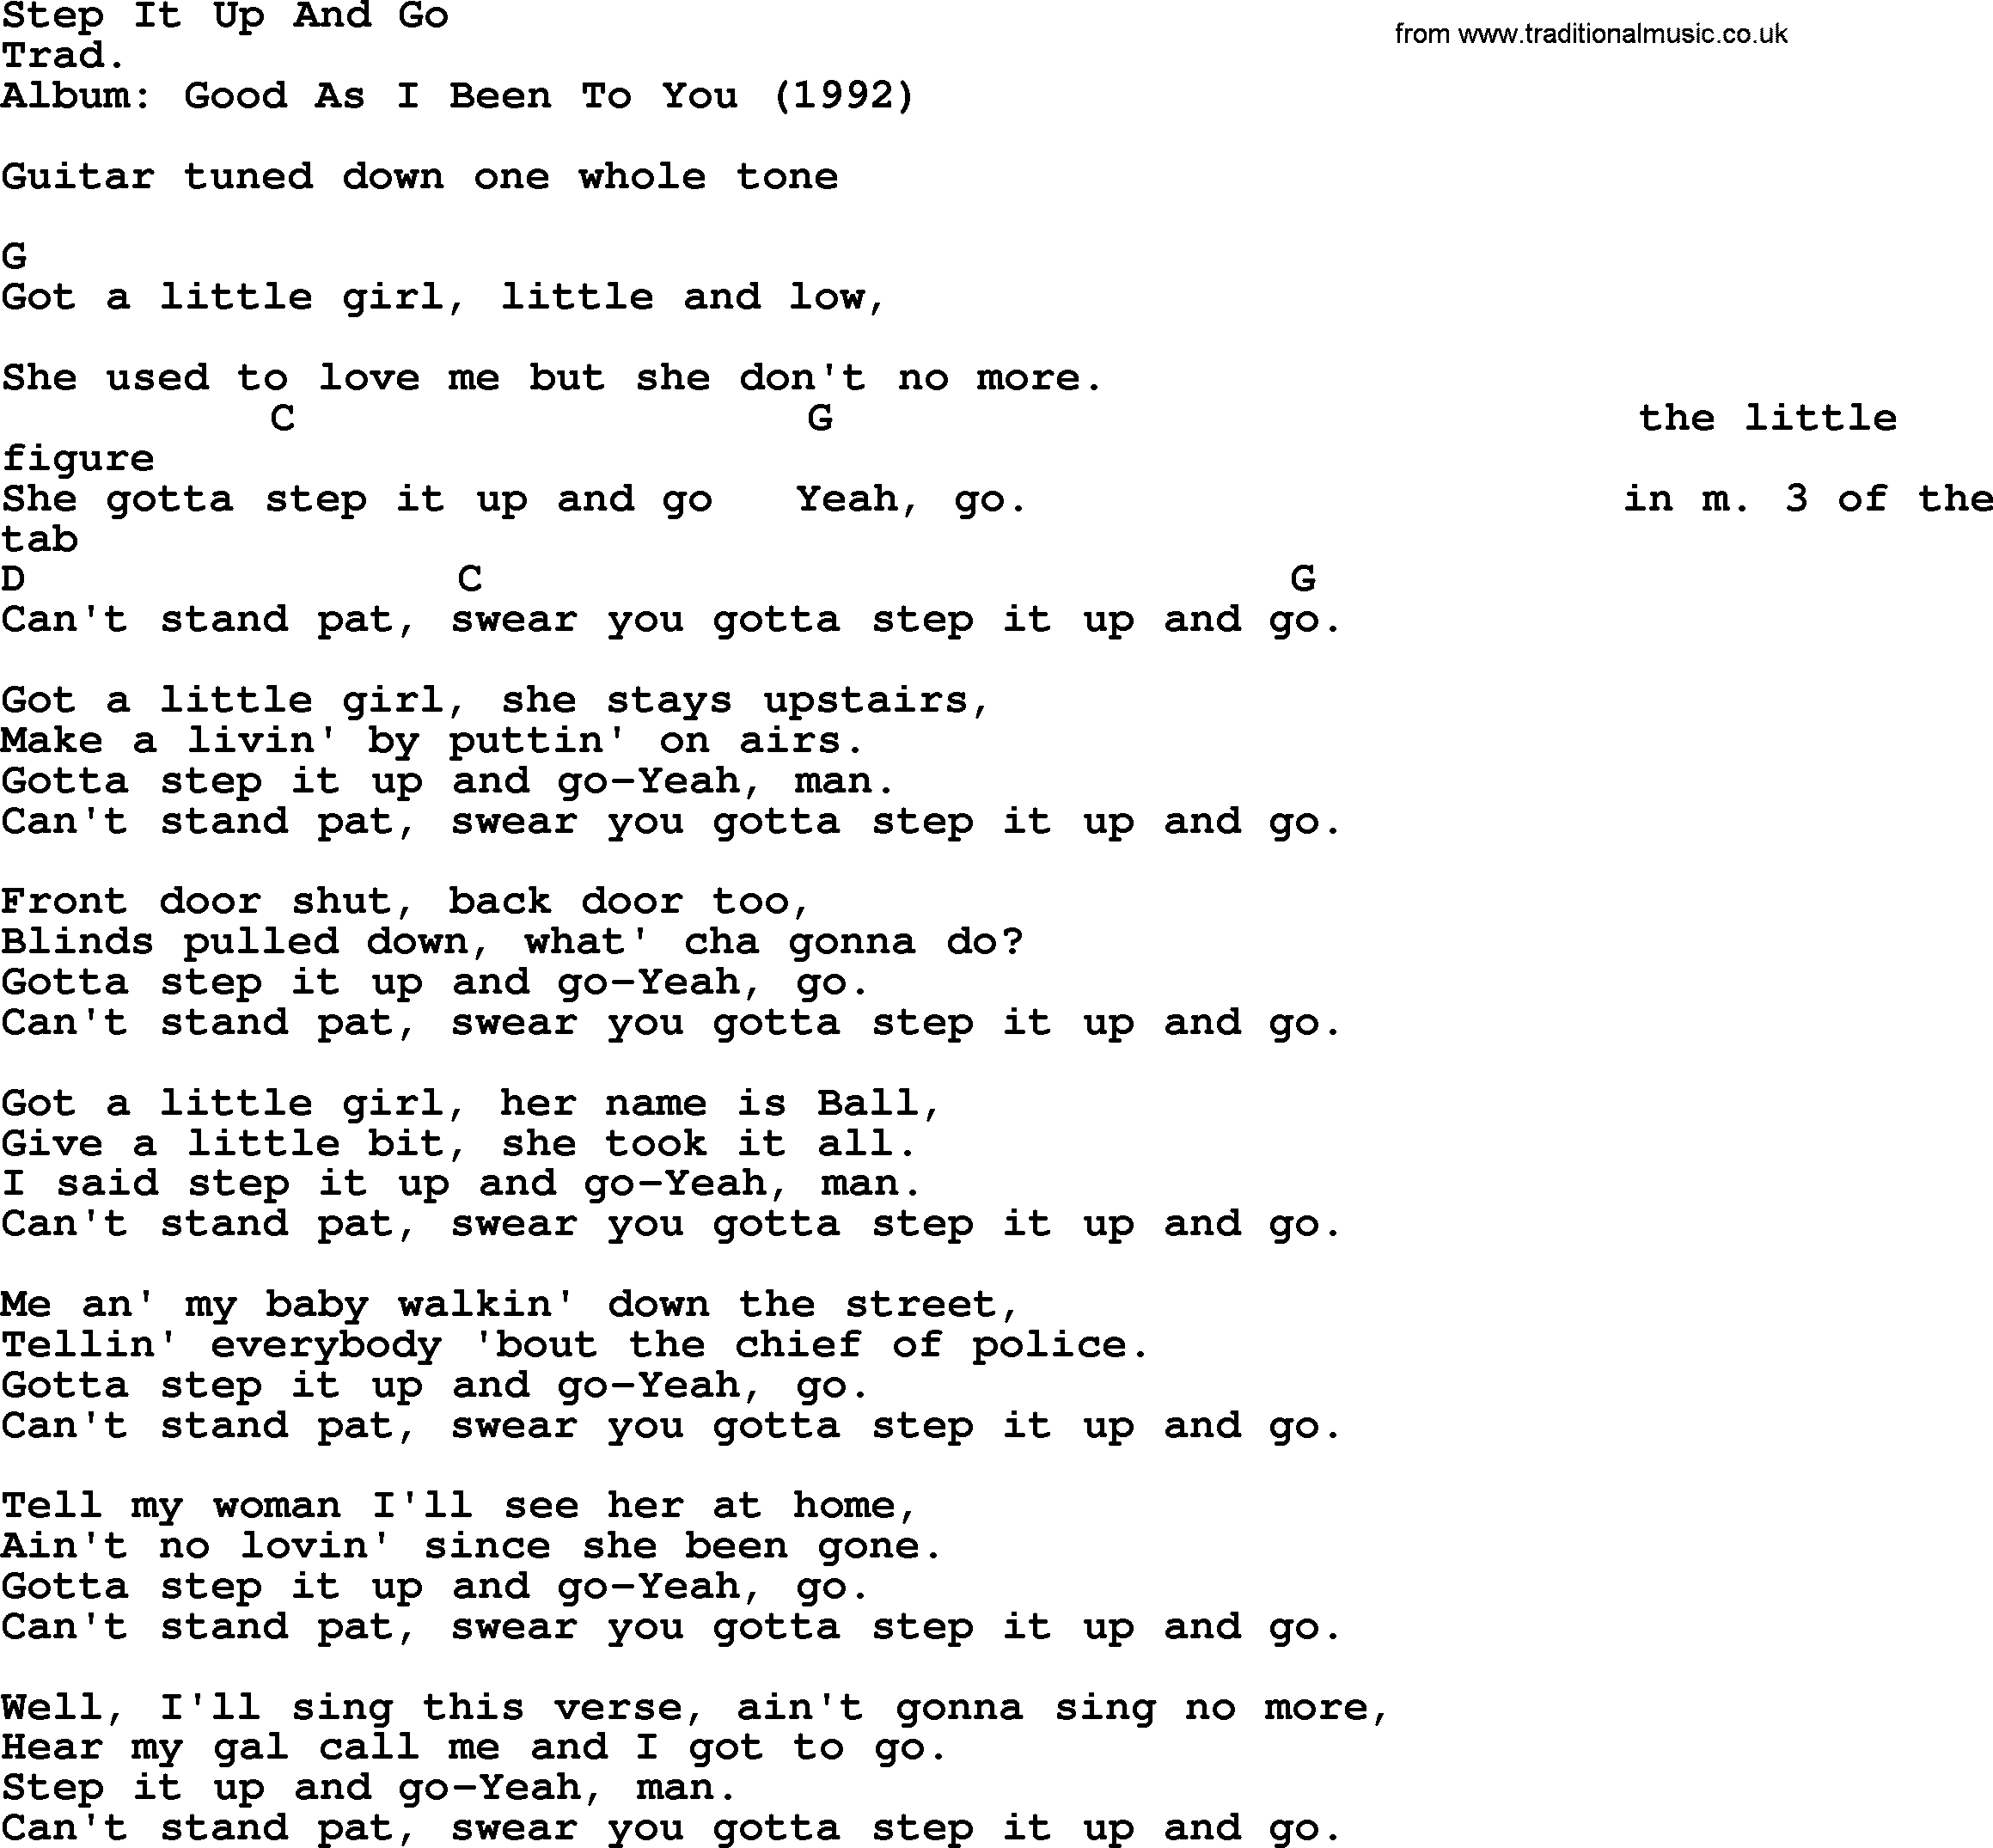 Bob Dylan song, lyrics with chords - Step It Up And Go